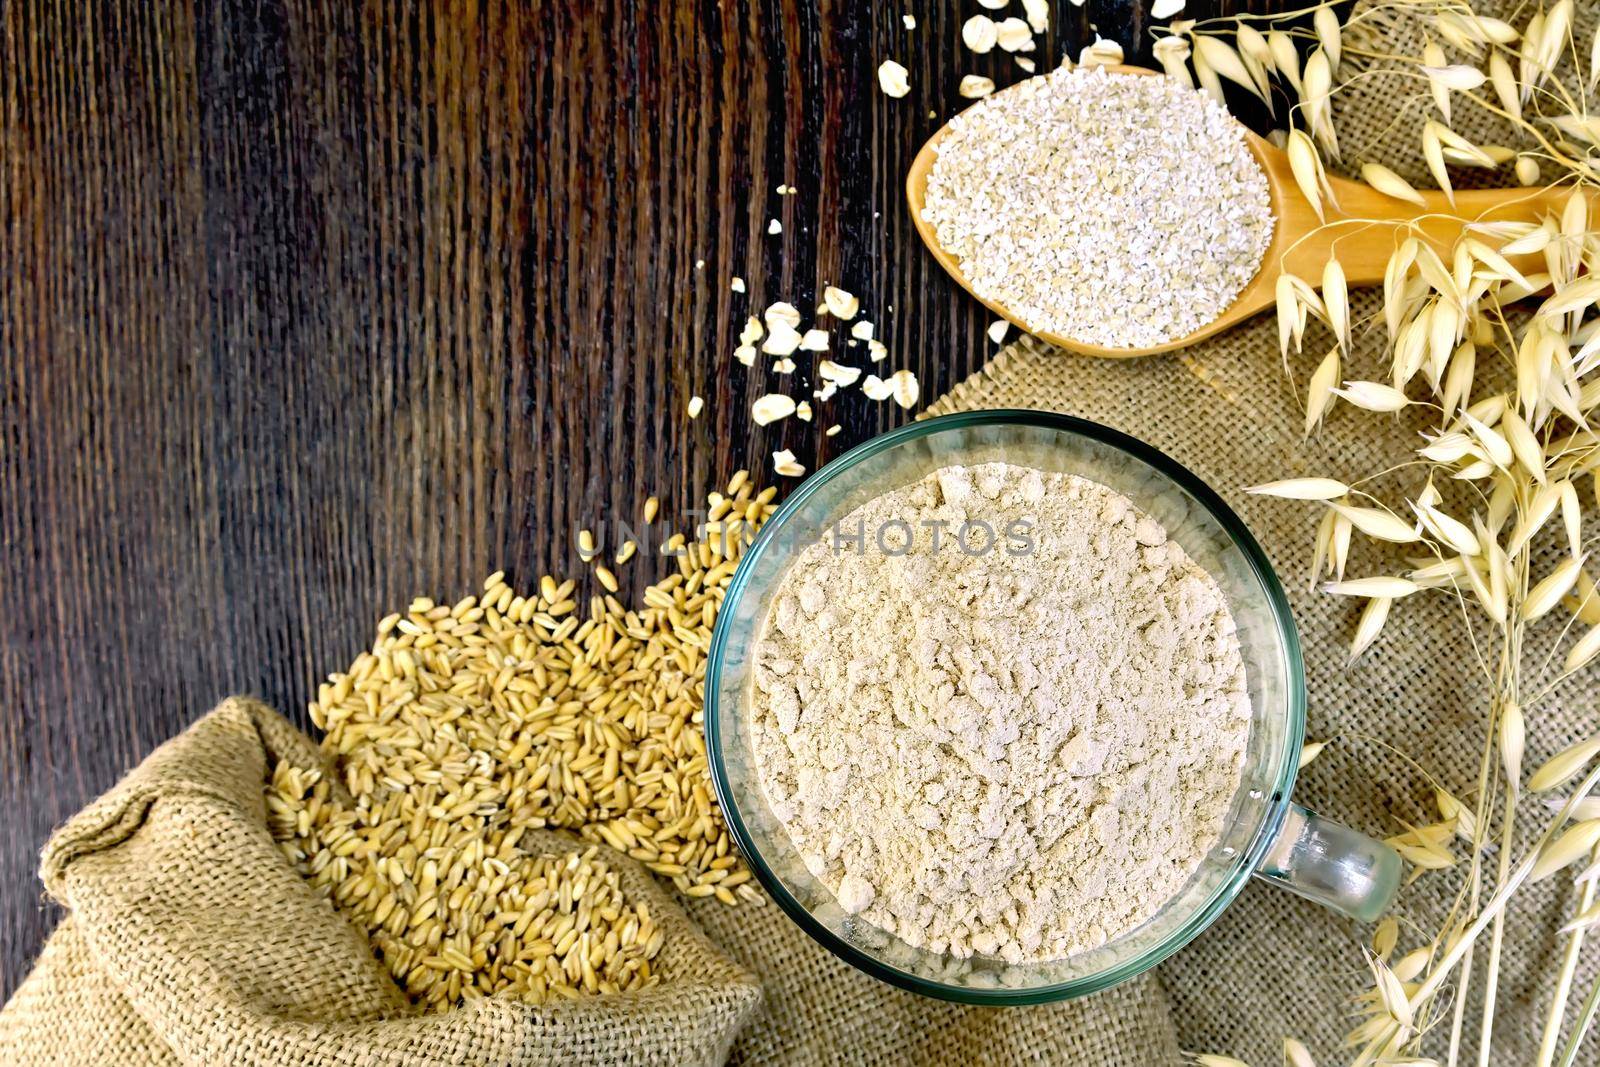 Oat Flour in a glass bowl, bran flakes in a spoon, oats and oatmeal stalks on sackcloth background on wooden board